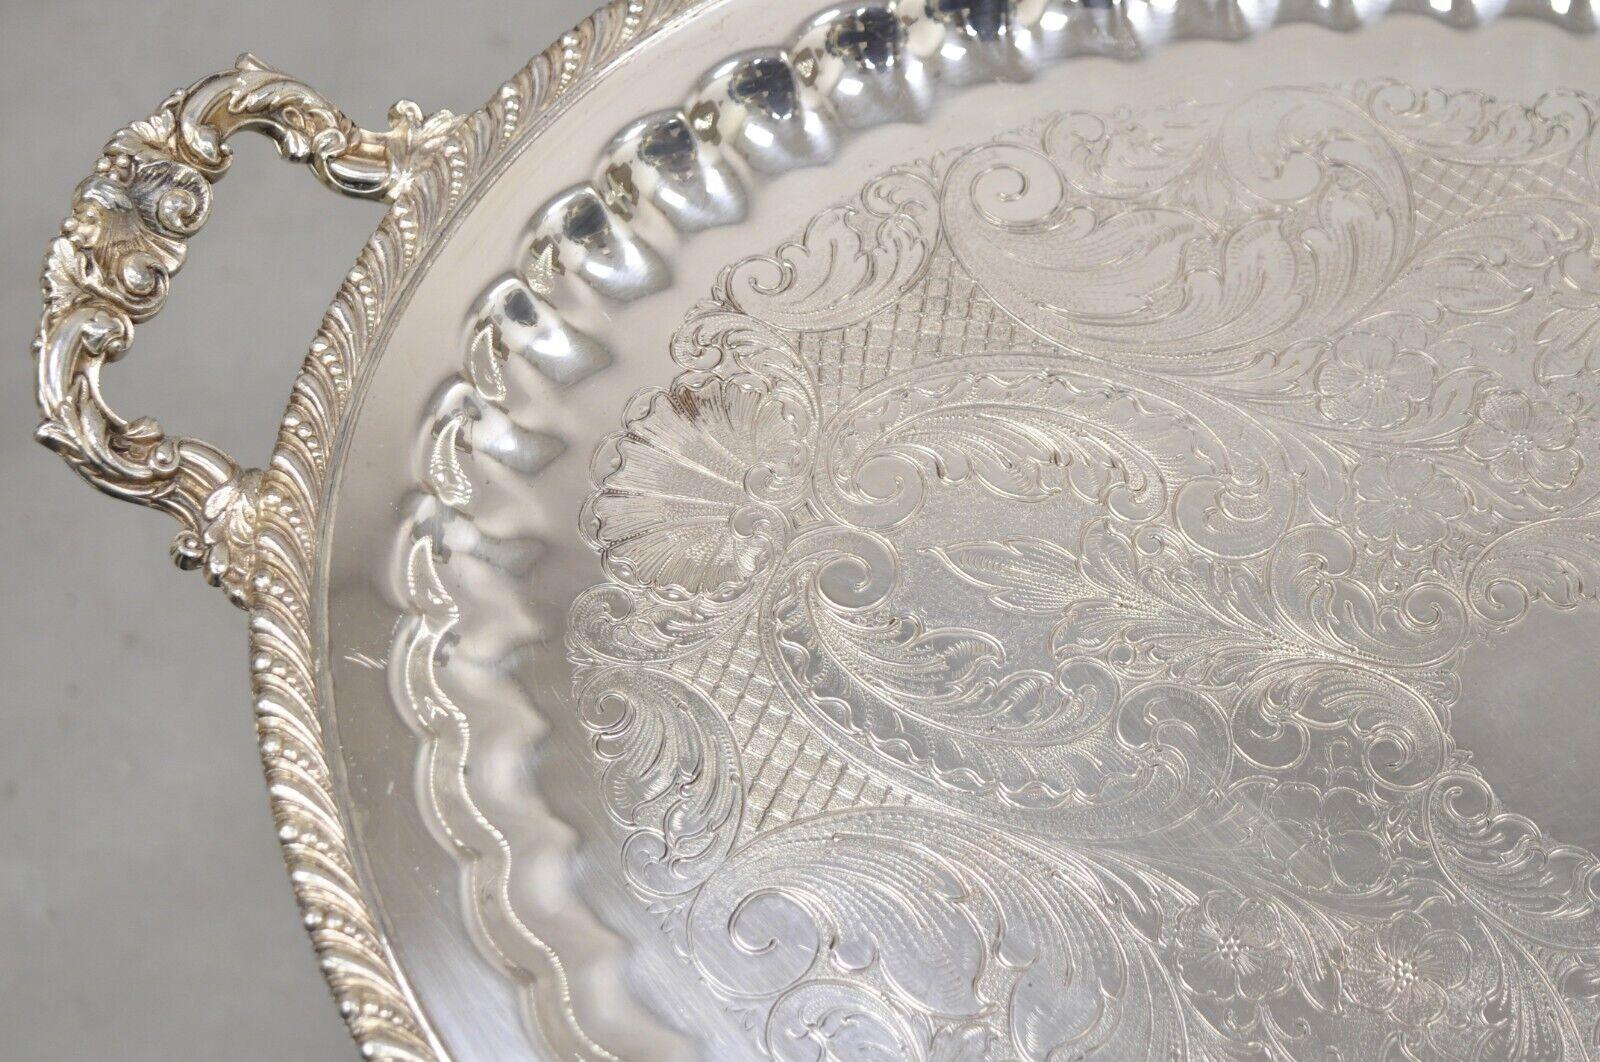 20th Century Antique JLS EPC Silver Plated Regency Style Ornate Oval Serving Platter Tray